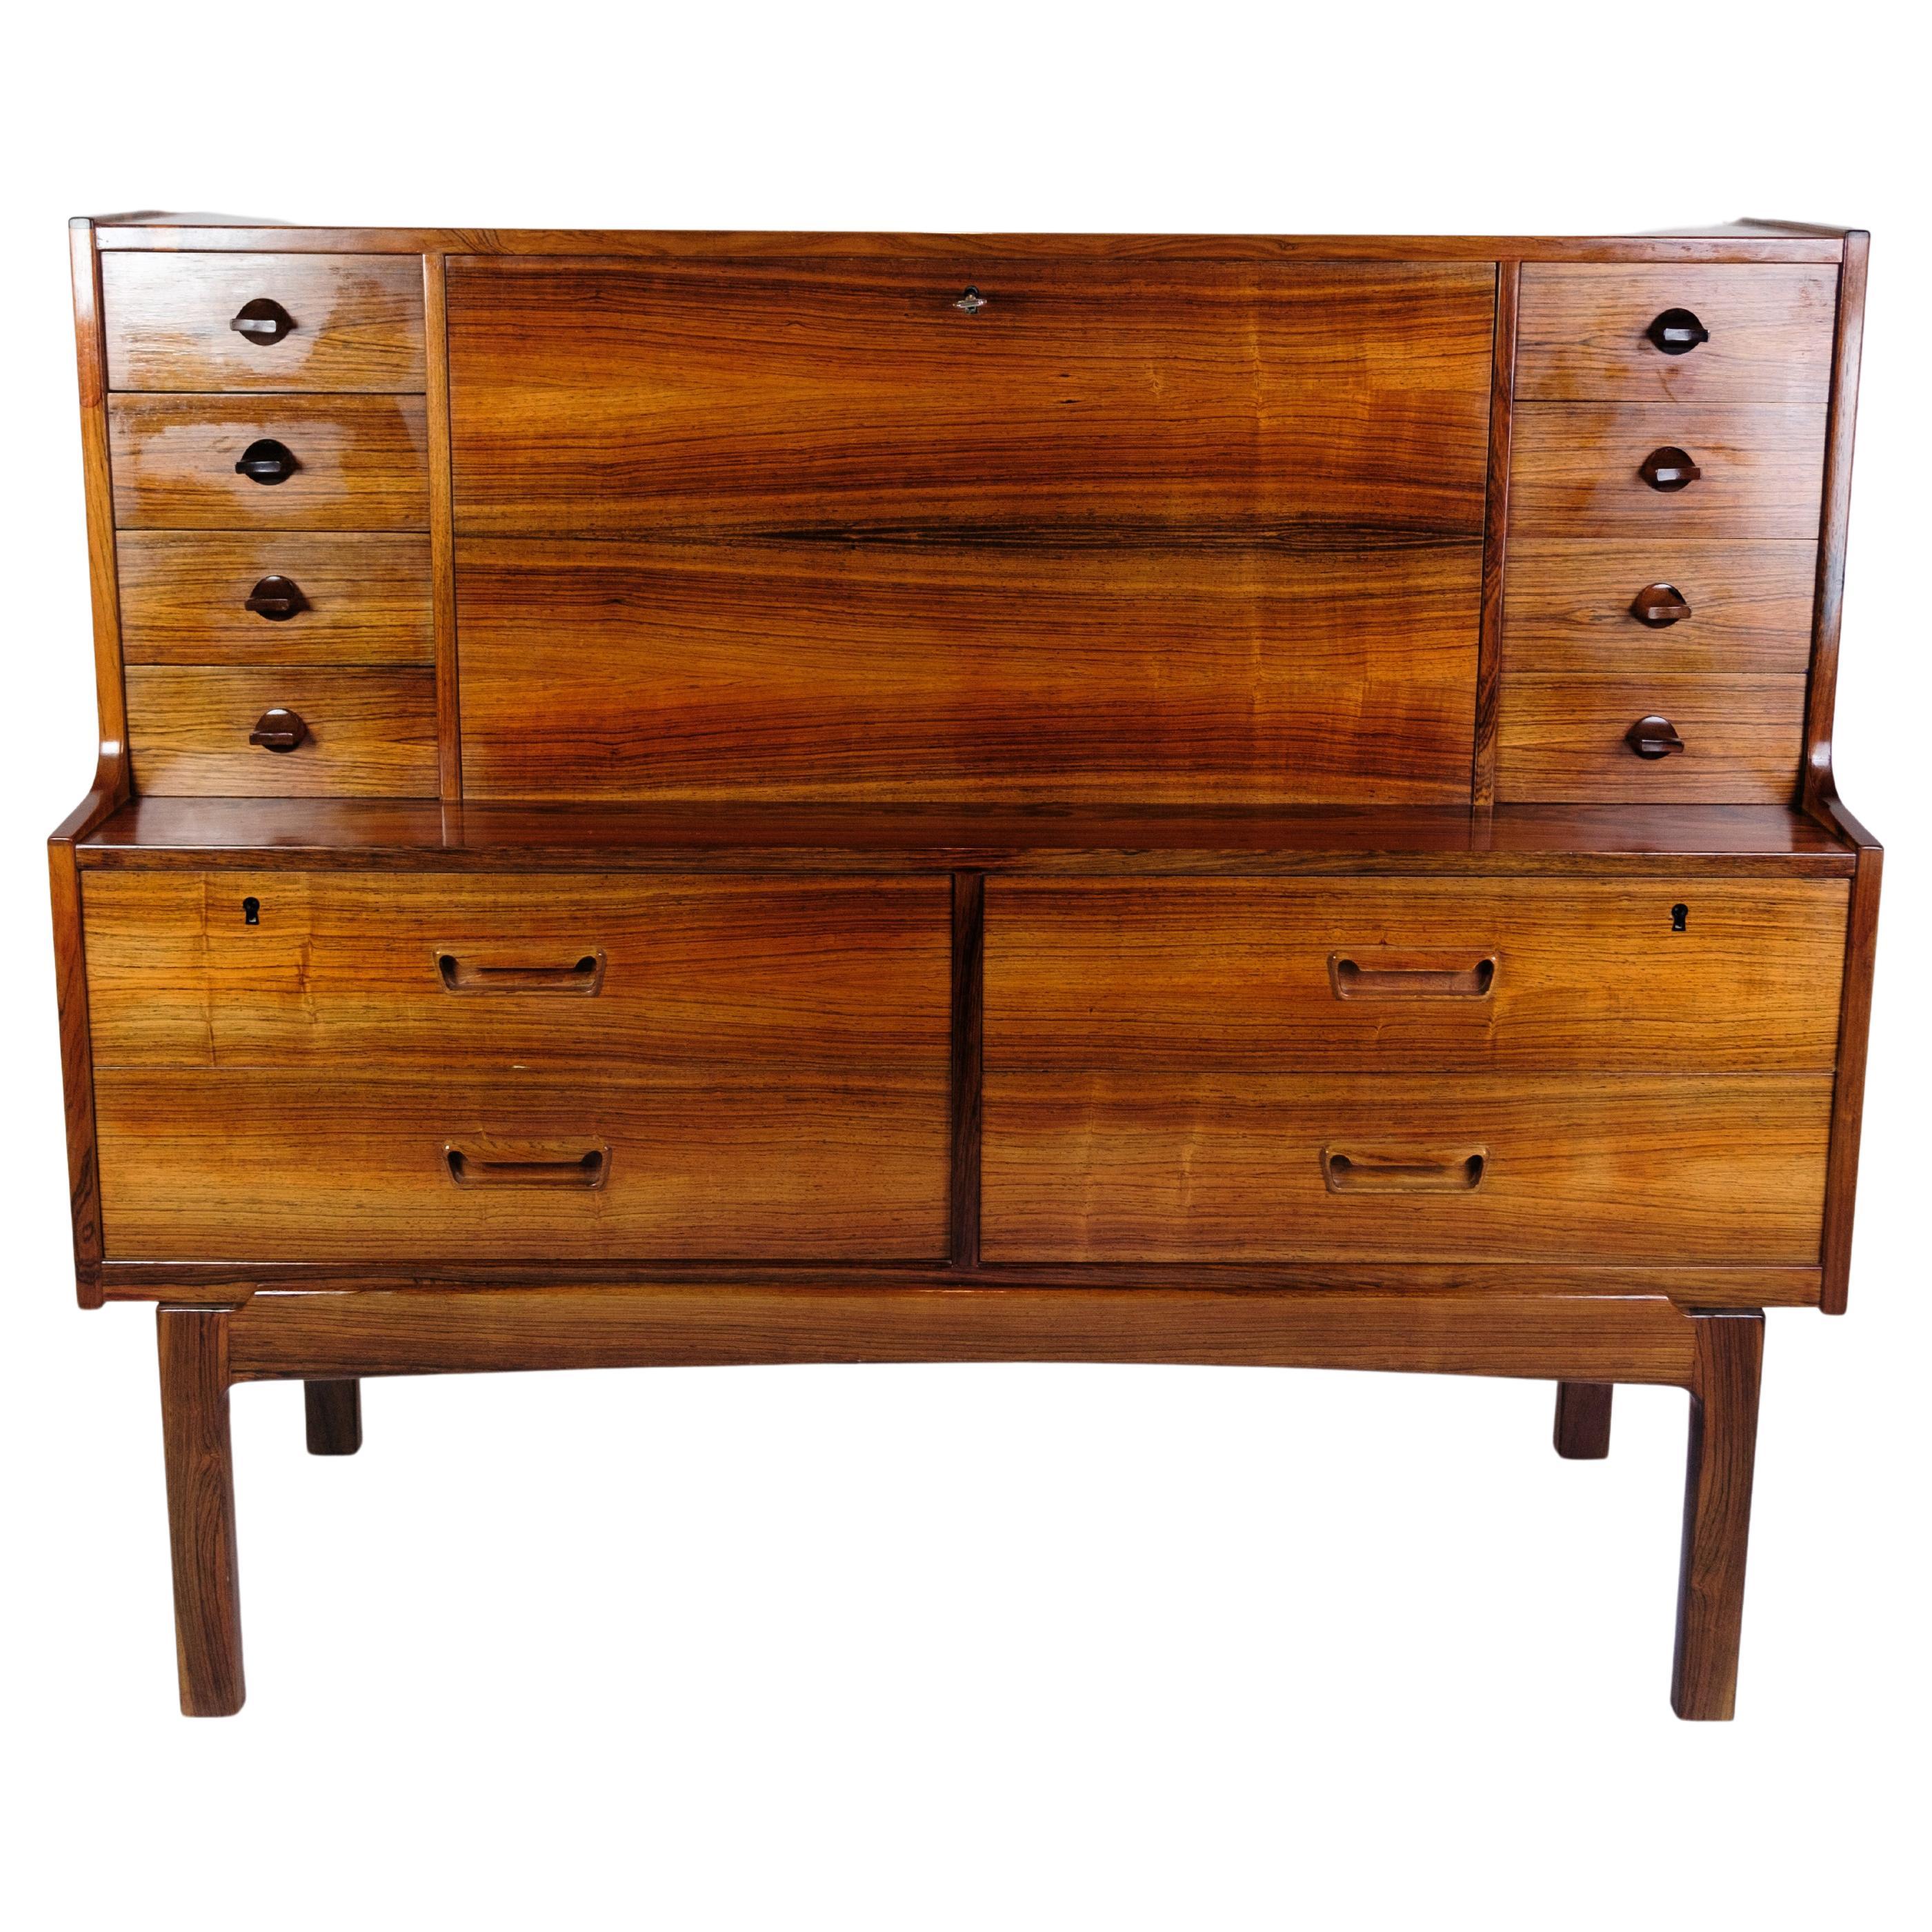 Commode in Rosewood With Drawers and Danish Design from the 1960s